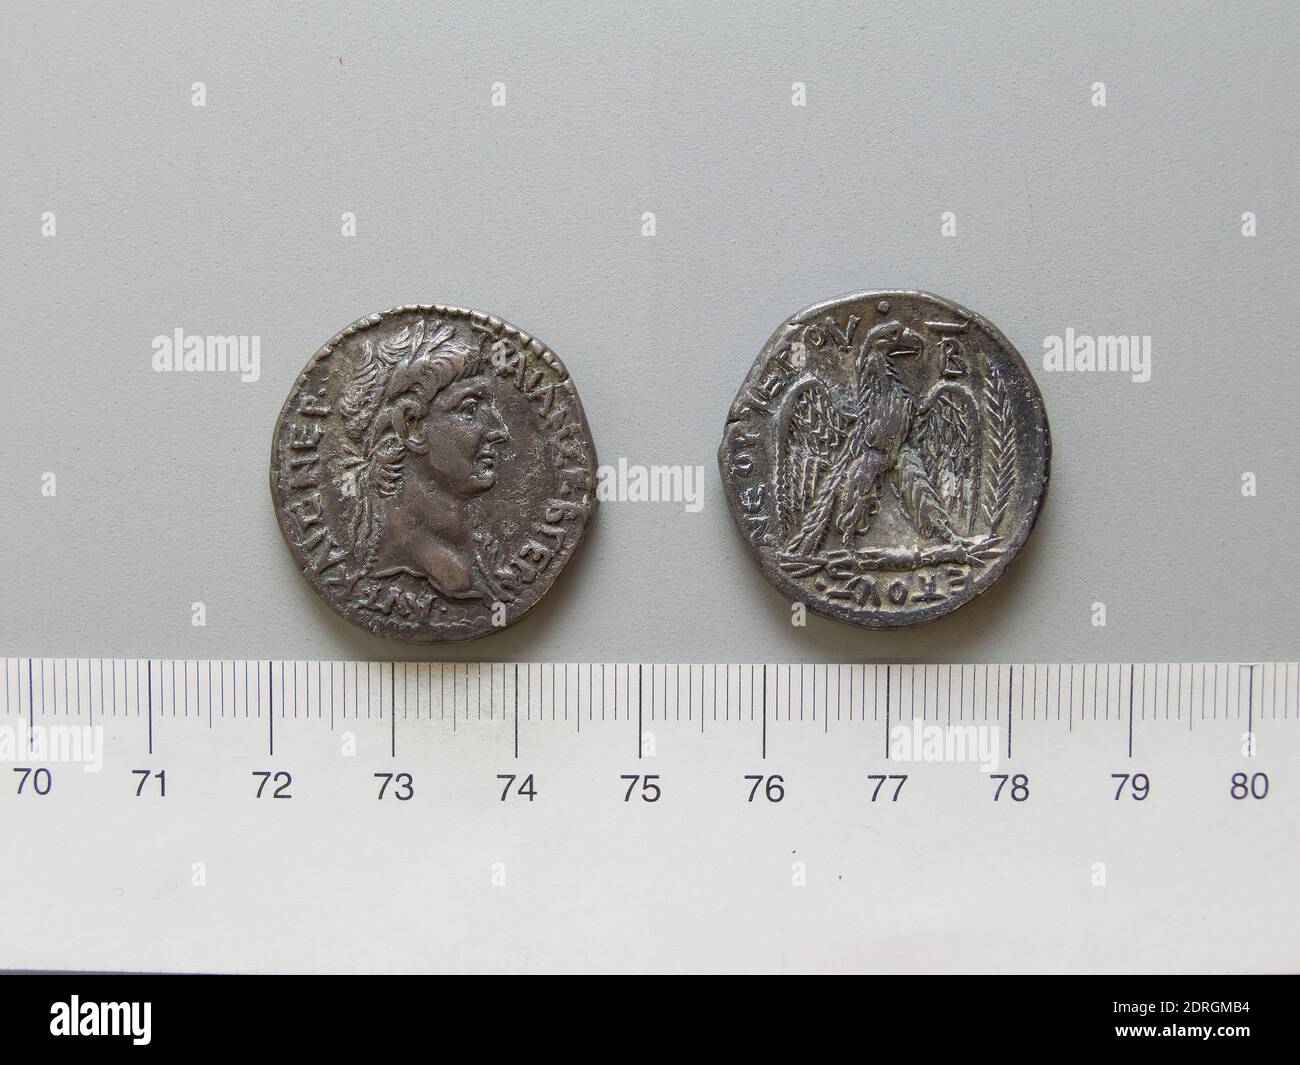 Ruler: Trajan, Emperor of Rome, A.D. 53–117, ruled 98–117, Mint: Antioch, Tetradrachm of Trajan, Emperor of Rome from Antioch, A.D. 98, Silver, 15.14 g, 12:00, 27.5 mm, Made in Antioch, Greek, 1st century A.D., Numismatics Stock Photo